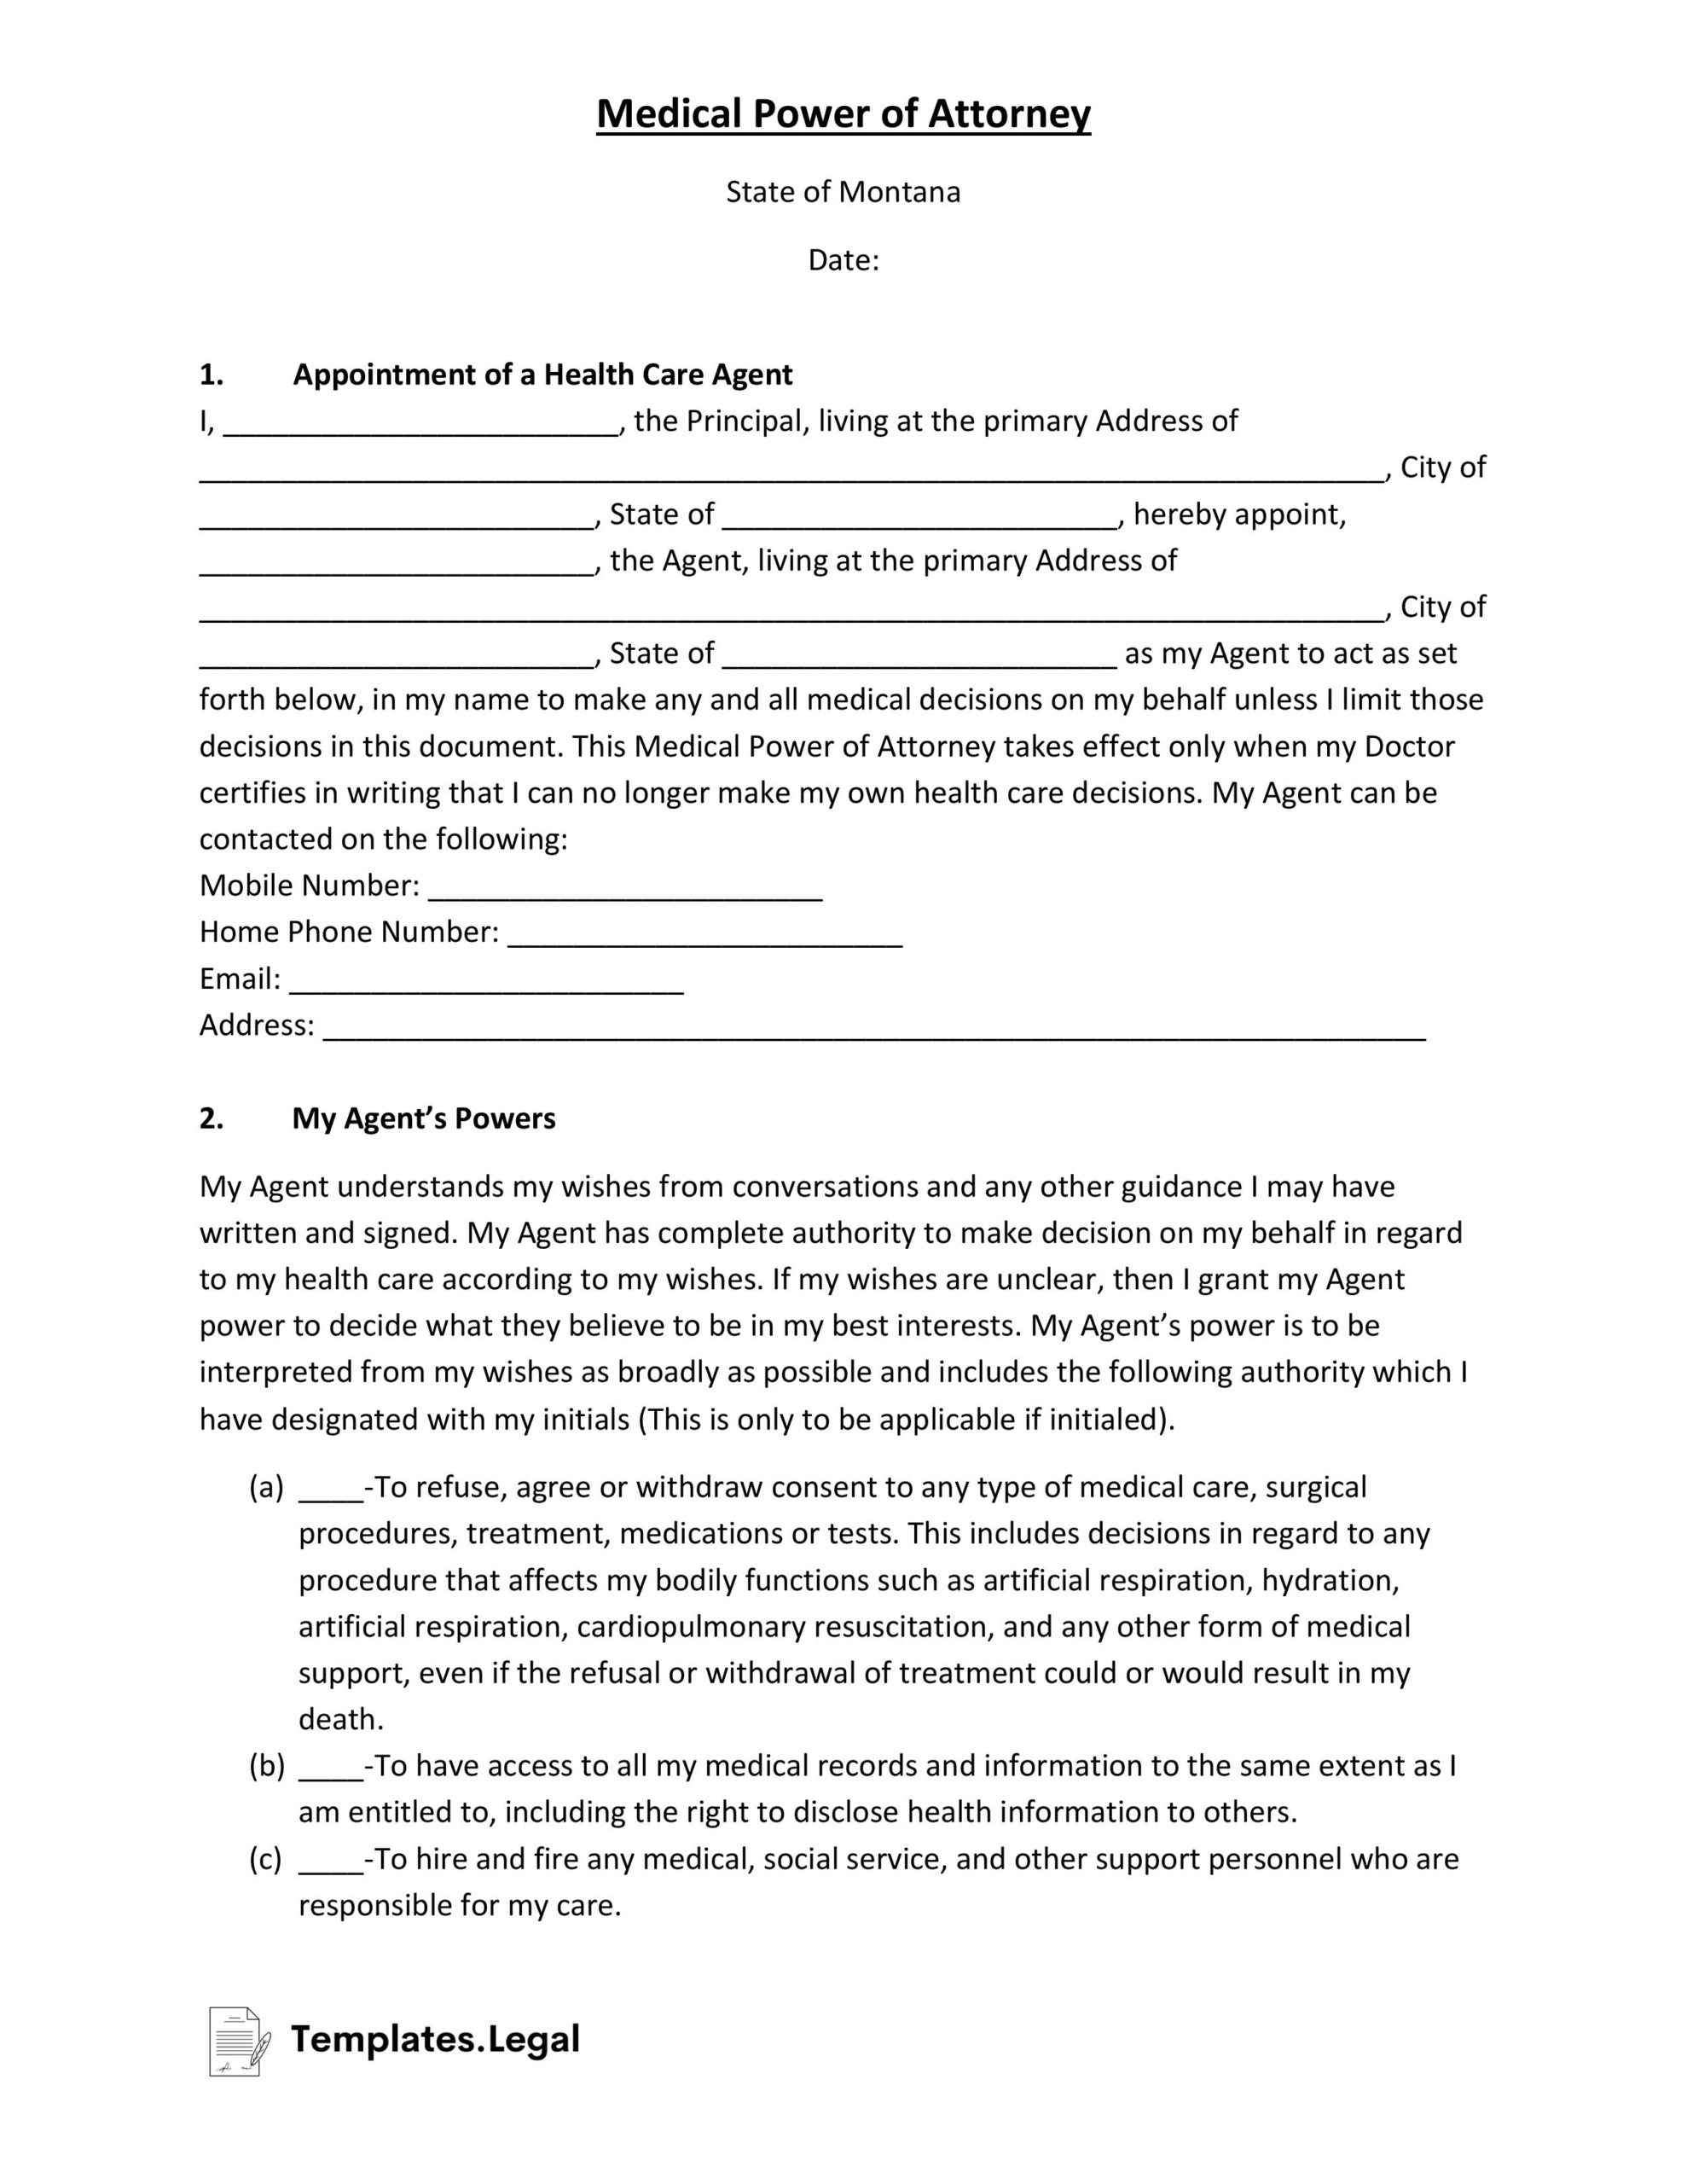 Montana Medical Power of Attorney- Templates.Legal